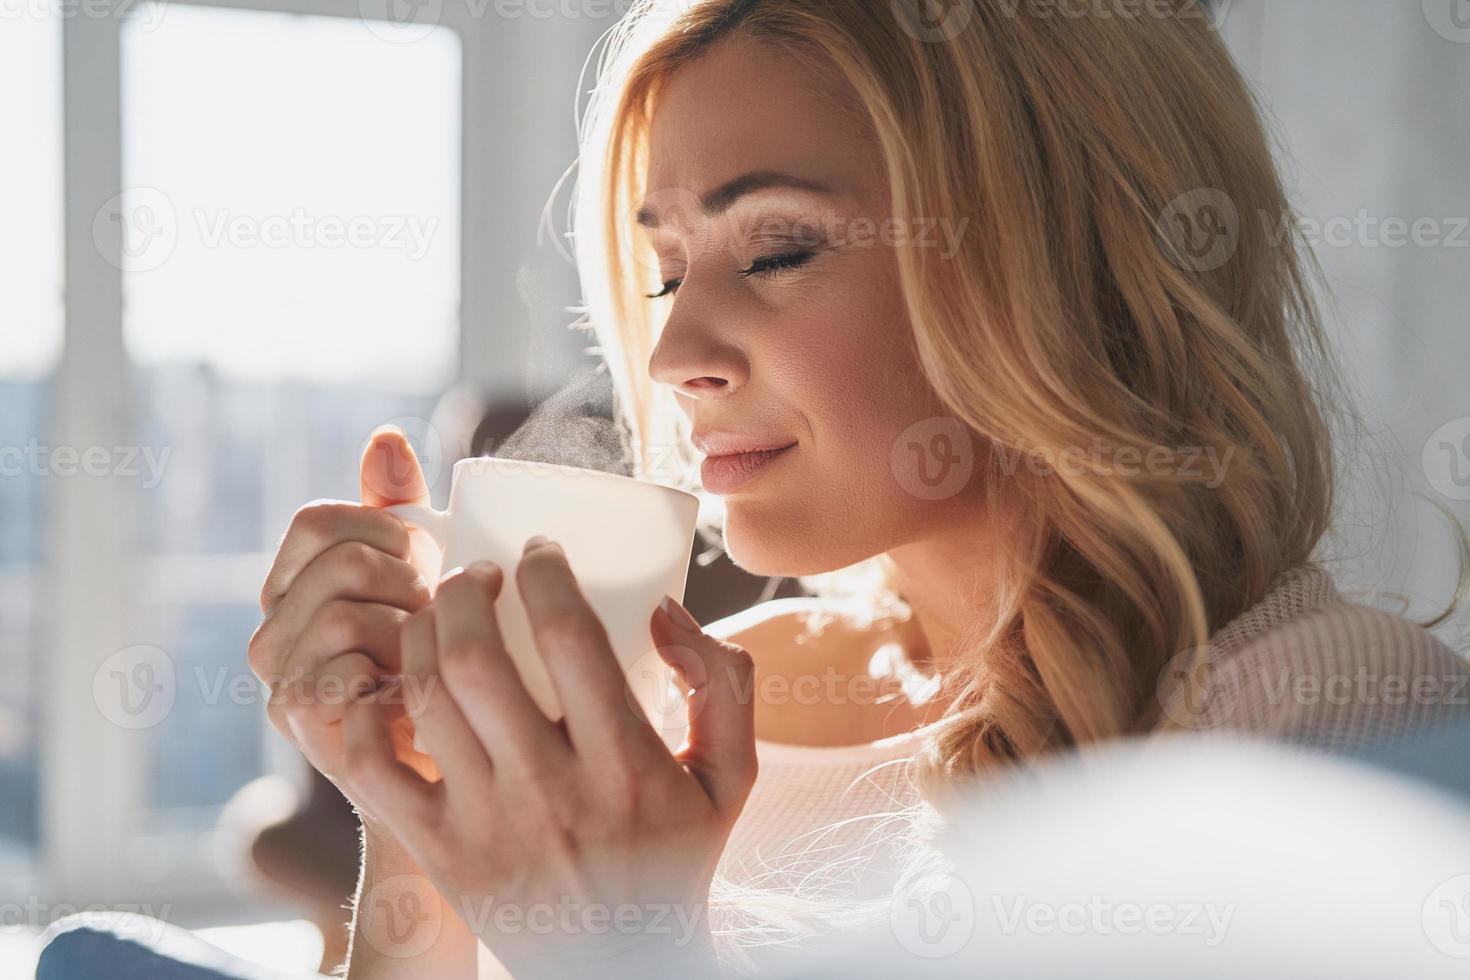 Simply happy. Attractive young woman holding a cup and keeping eyes closed with smile while spending time at home photo